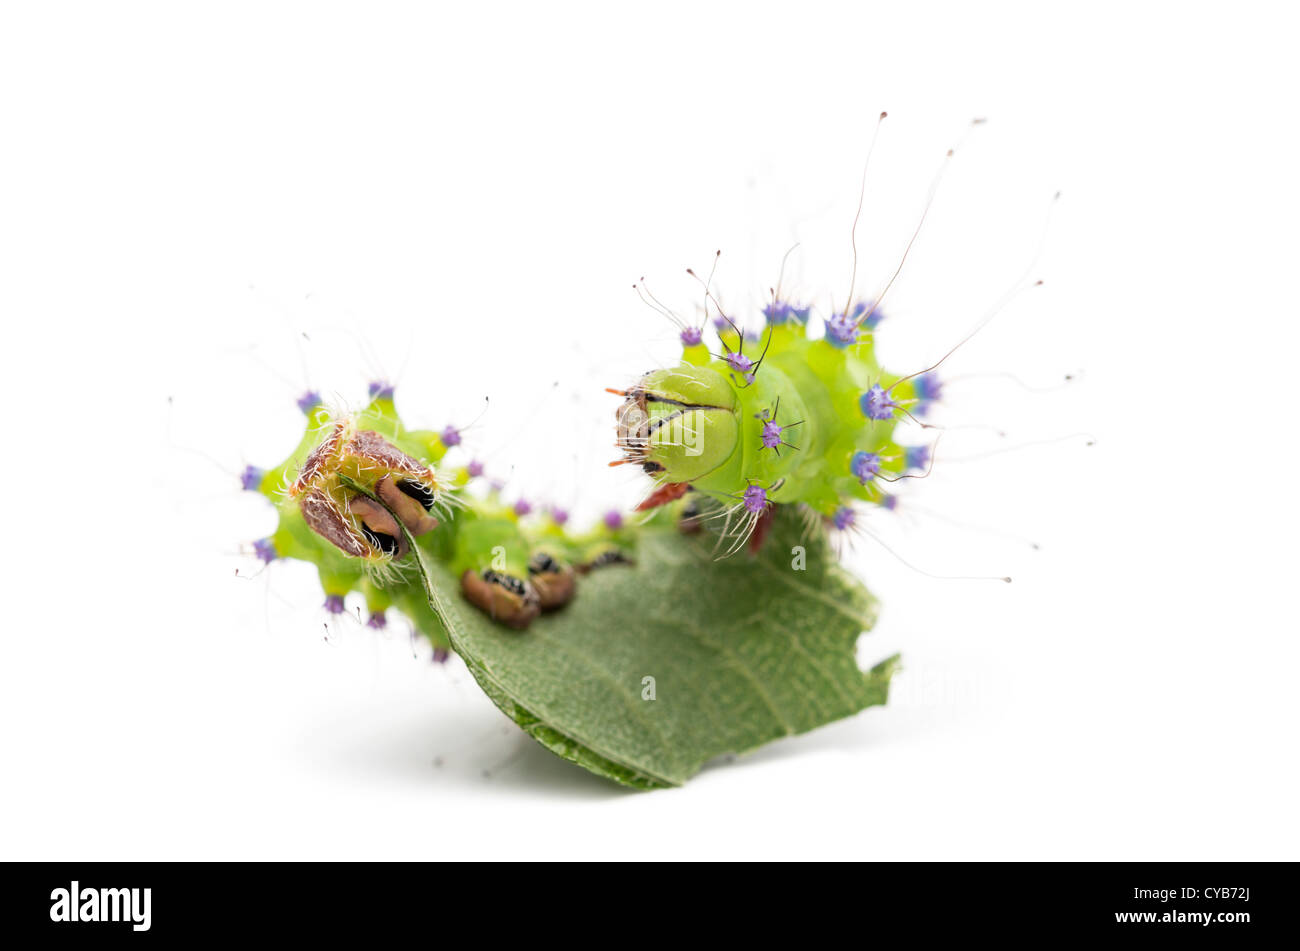 Caterpillar of the Giant Peacock Moth, Saturnia pyri, eating leaf in front of white background Stock Photo